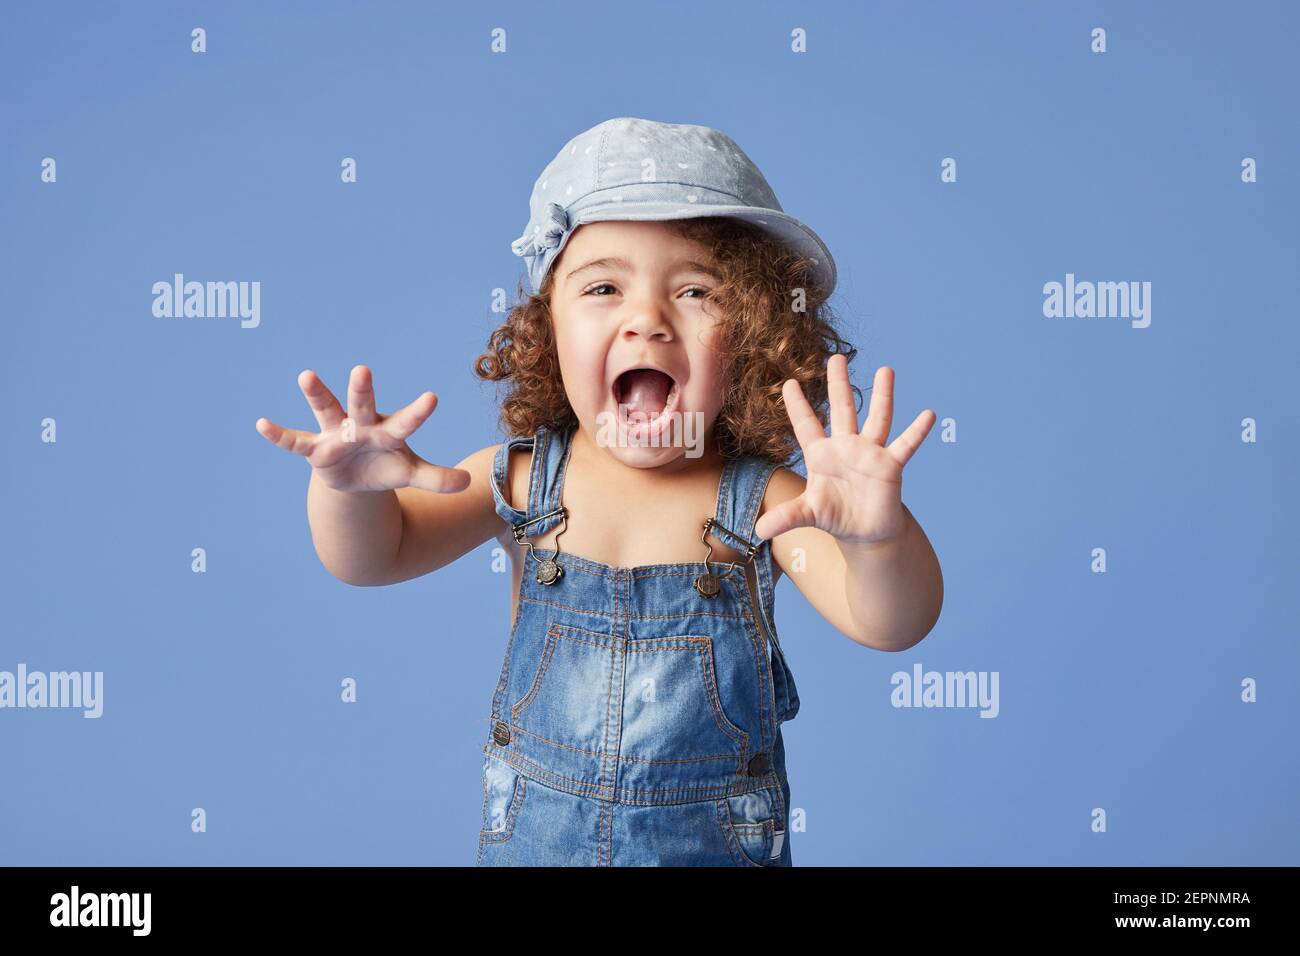 Charming barefoot child in denim dress and hat with curly hair looking a camera while standing on blue background making faces Stock Photo